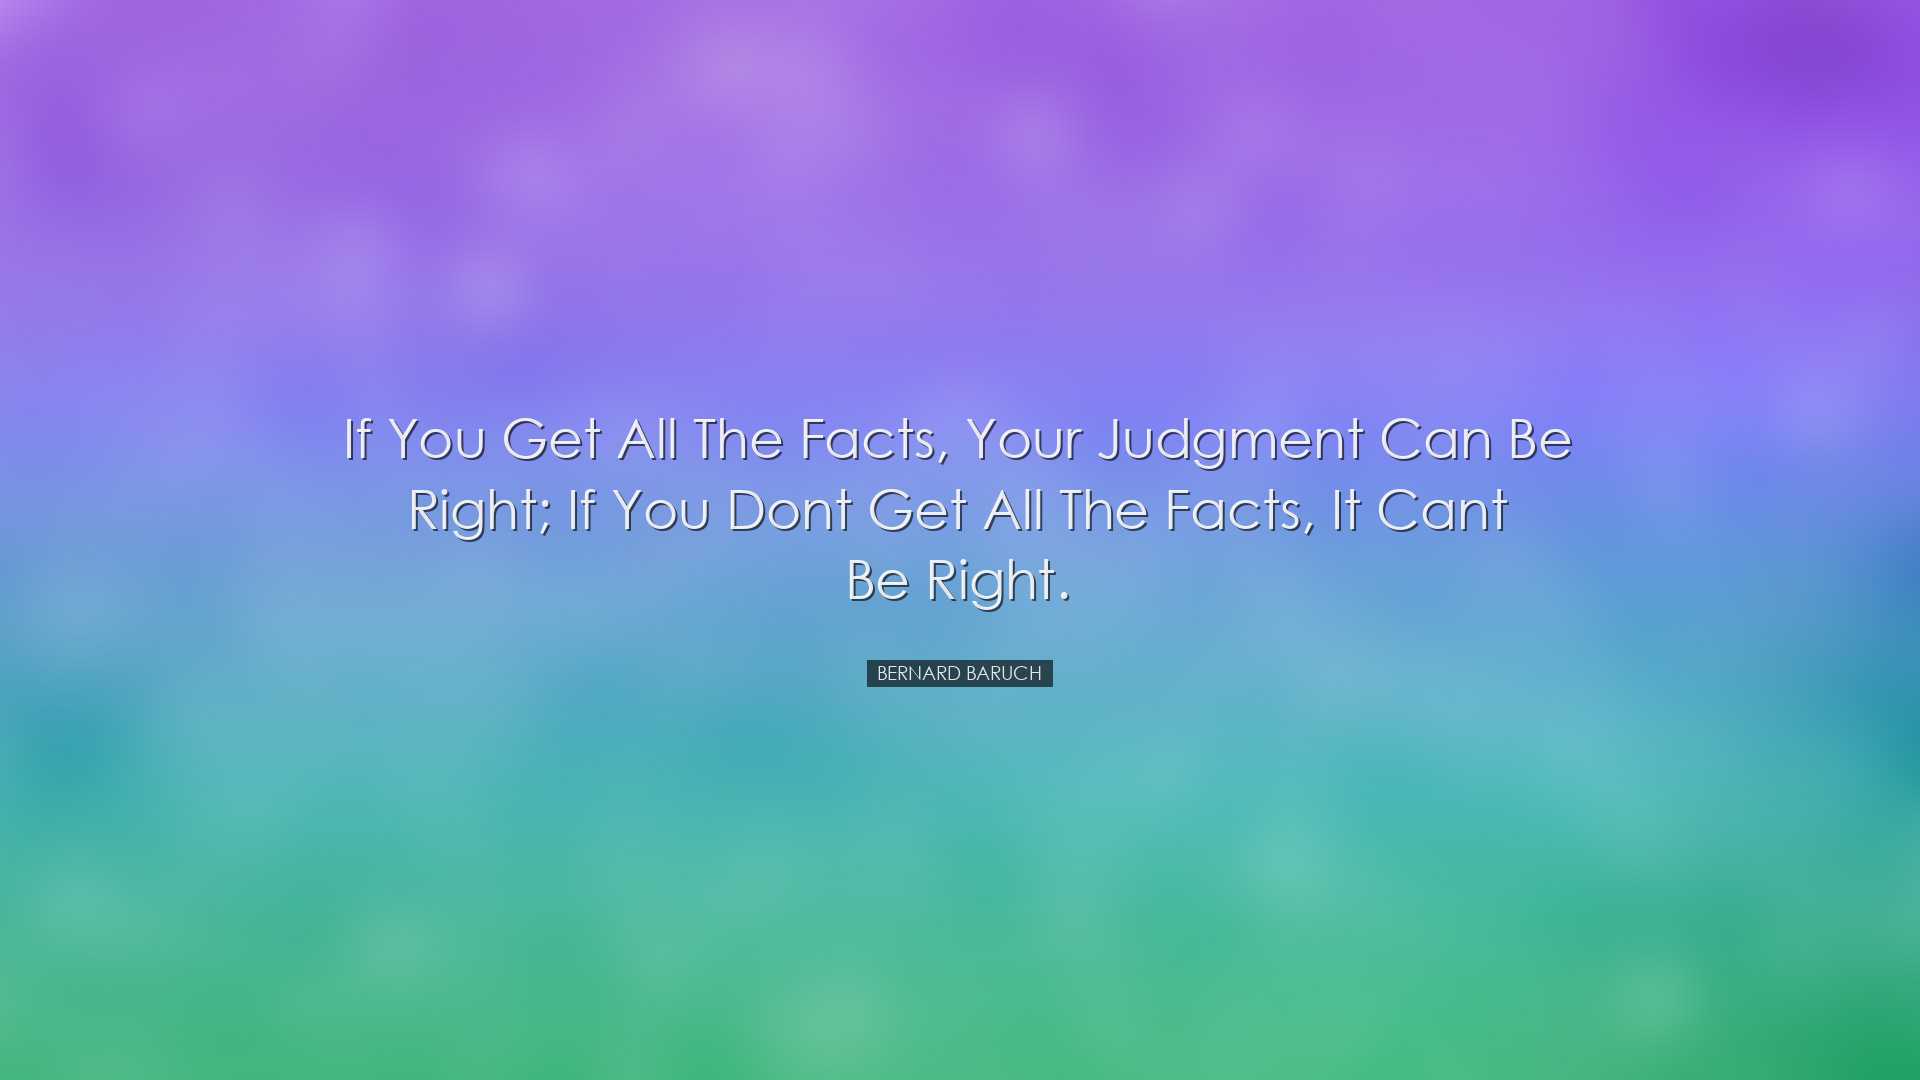 If you get all the facts, your judgment can be right; if you dont